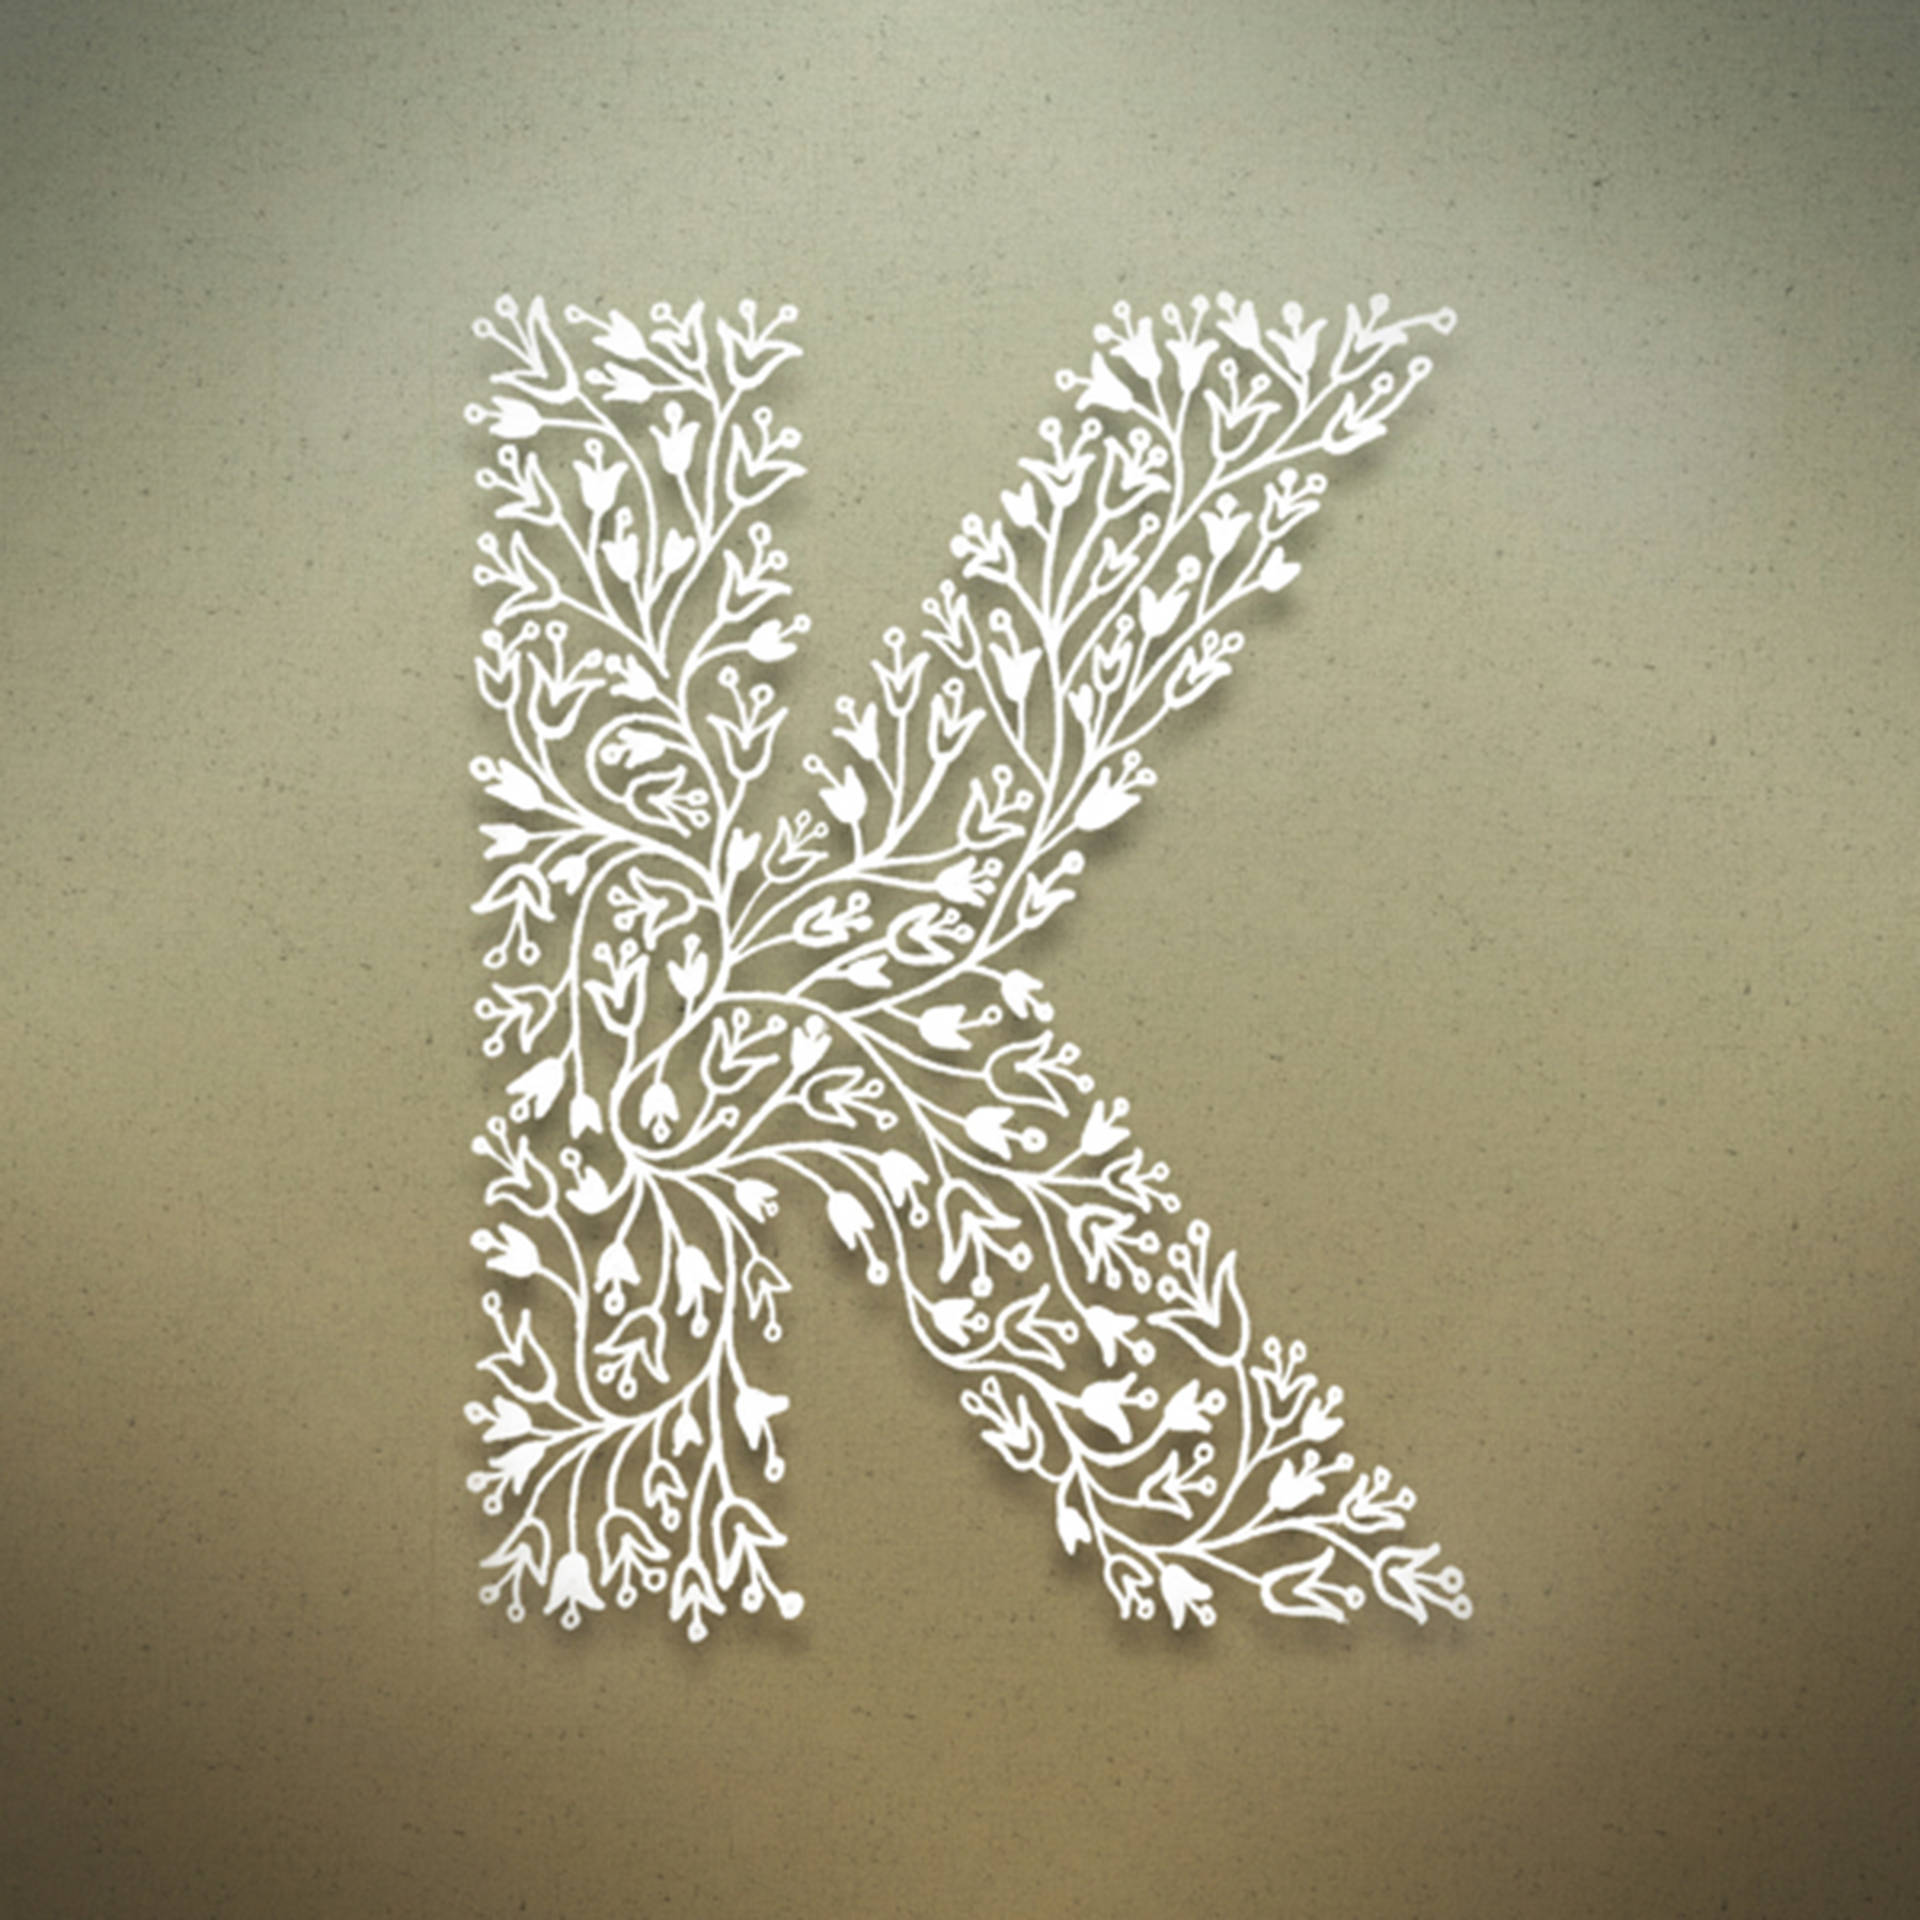 Royal Letter K In Glitter And Gold Background